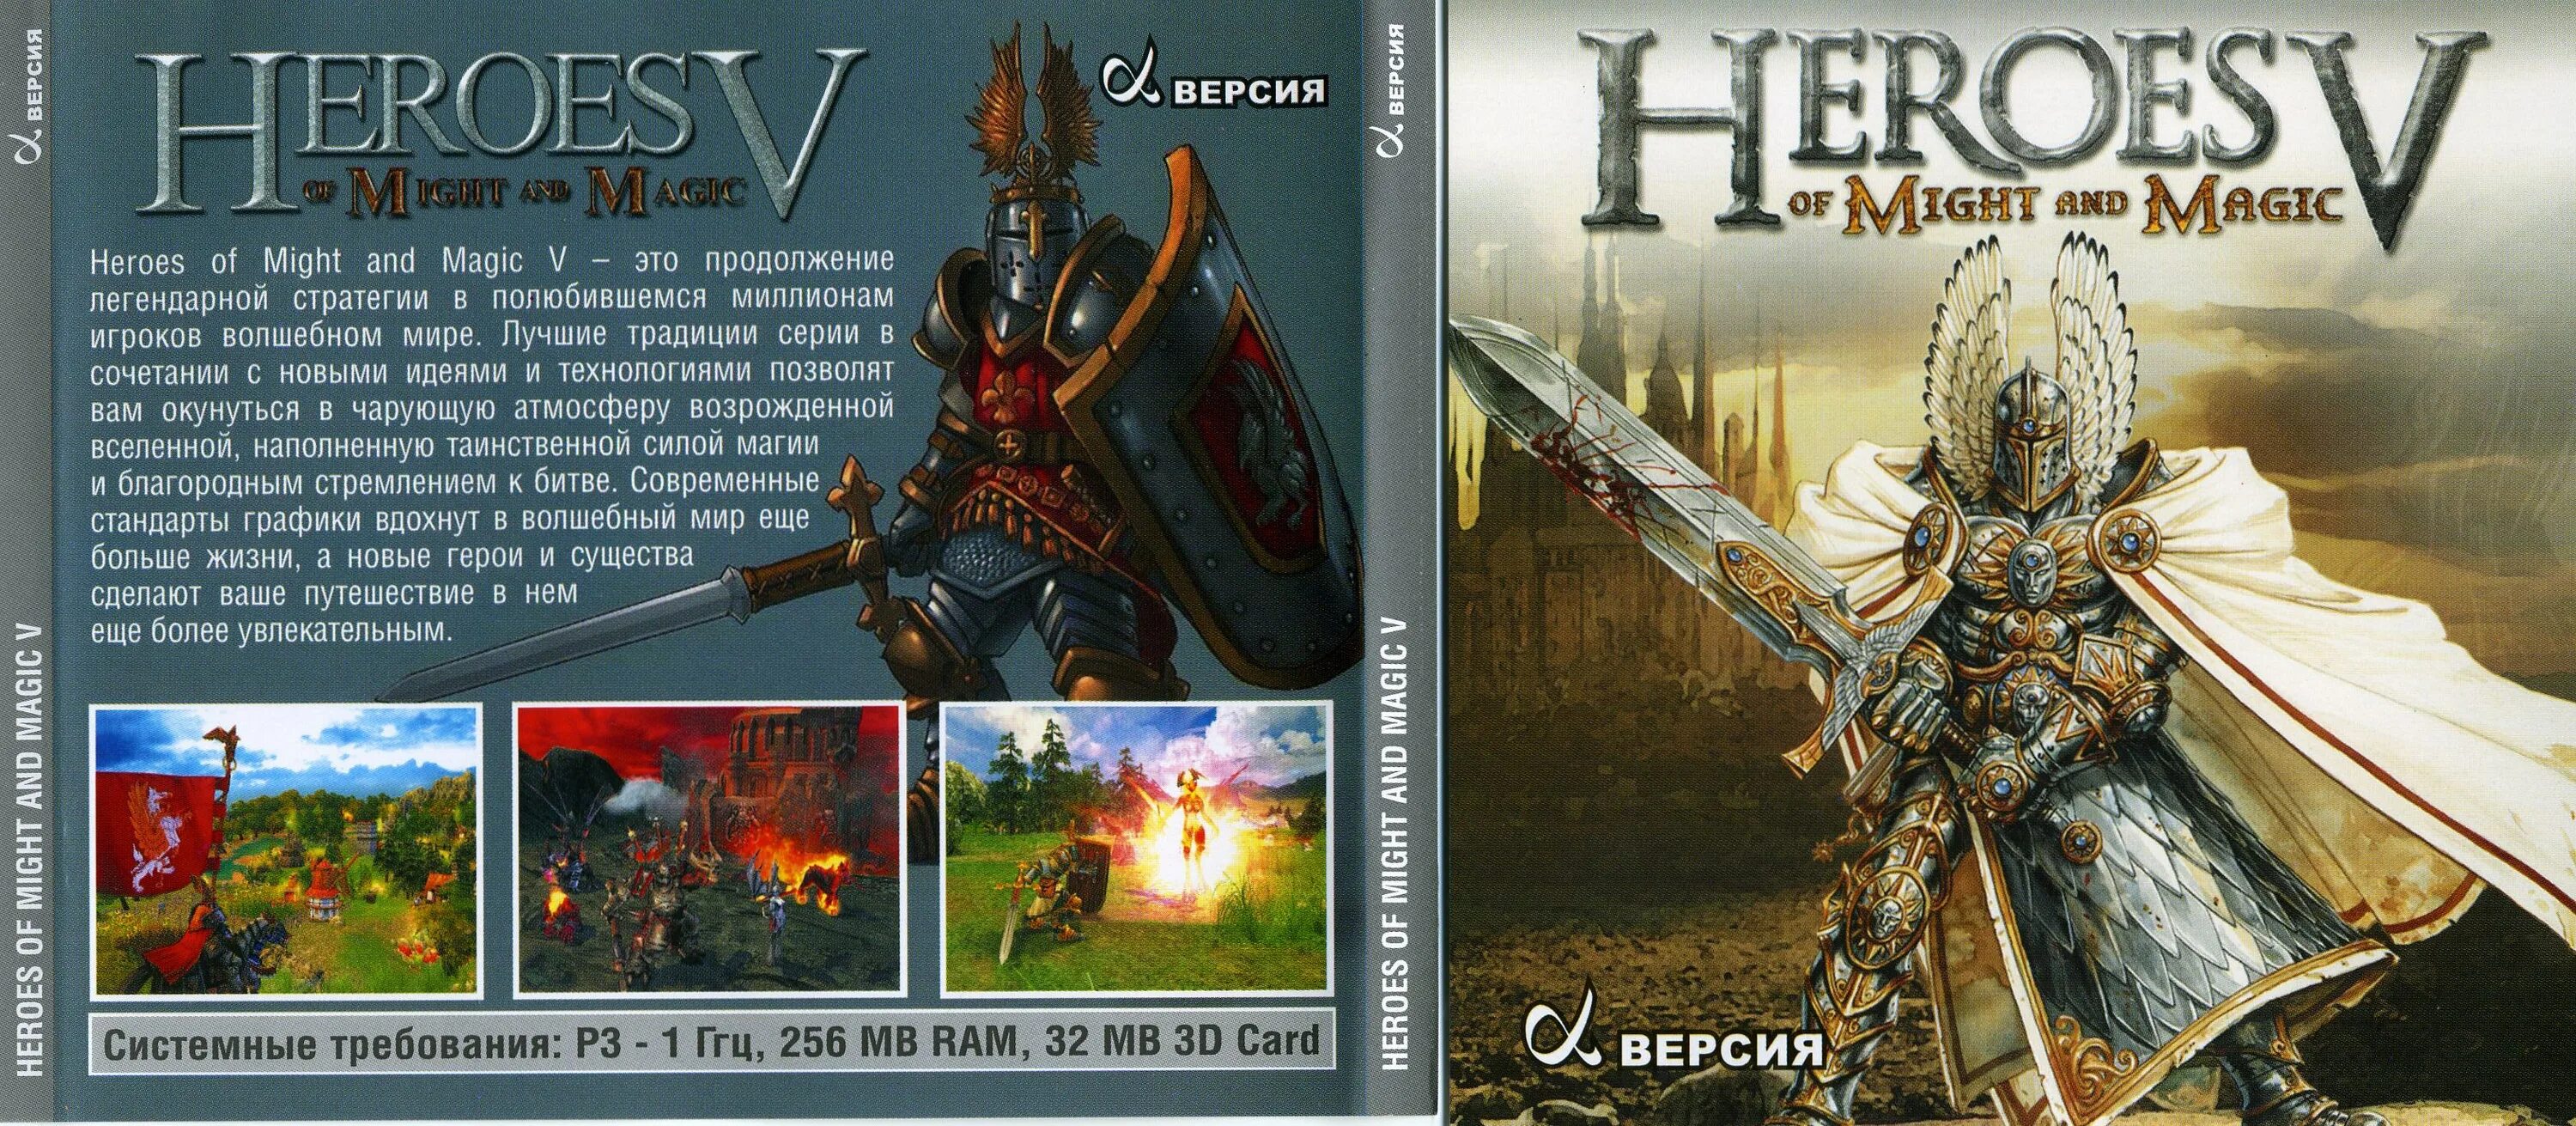 Герои heroes of might and magic. Heroes of might and Magic v диск. Heroes of might and Magic диск. Heroes of might and Magic 5 обложка. Heroes of might and Magic 5 диск.